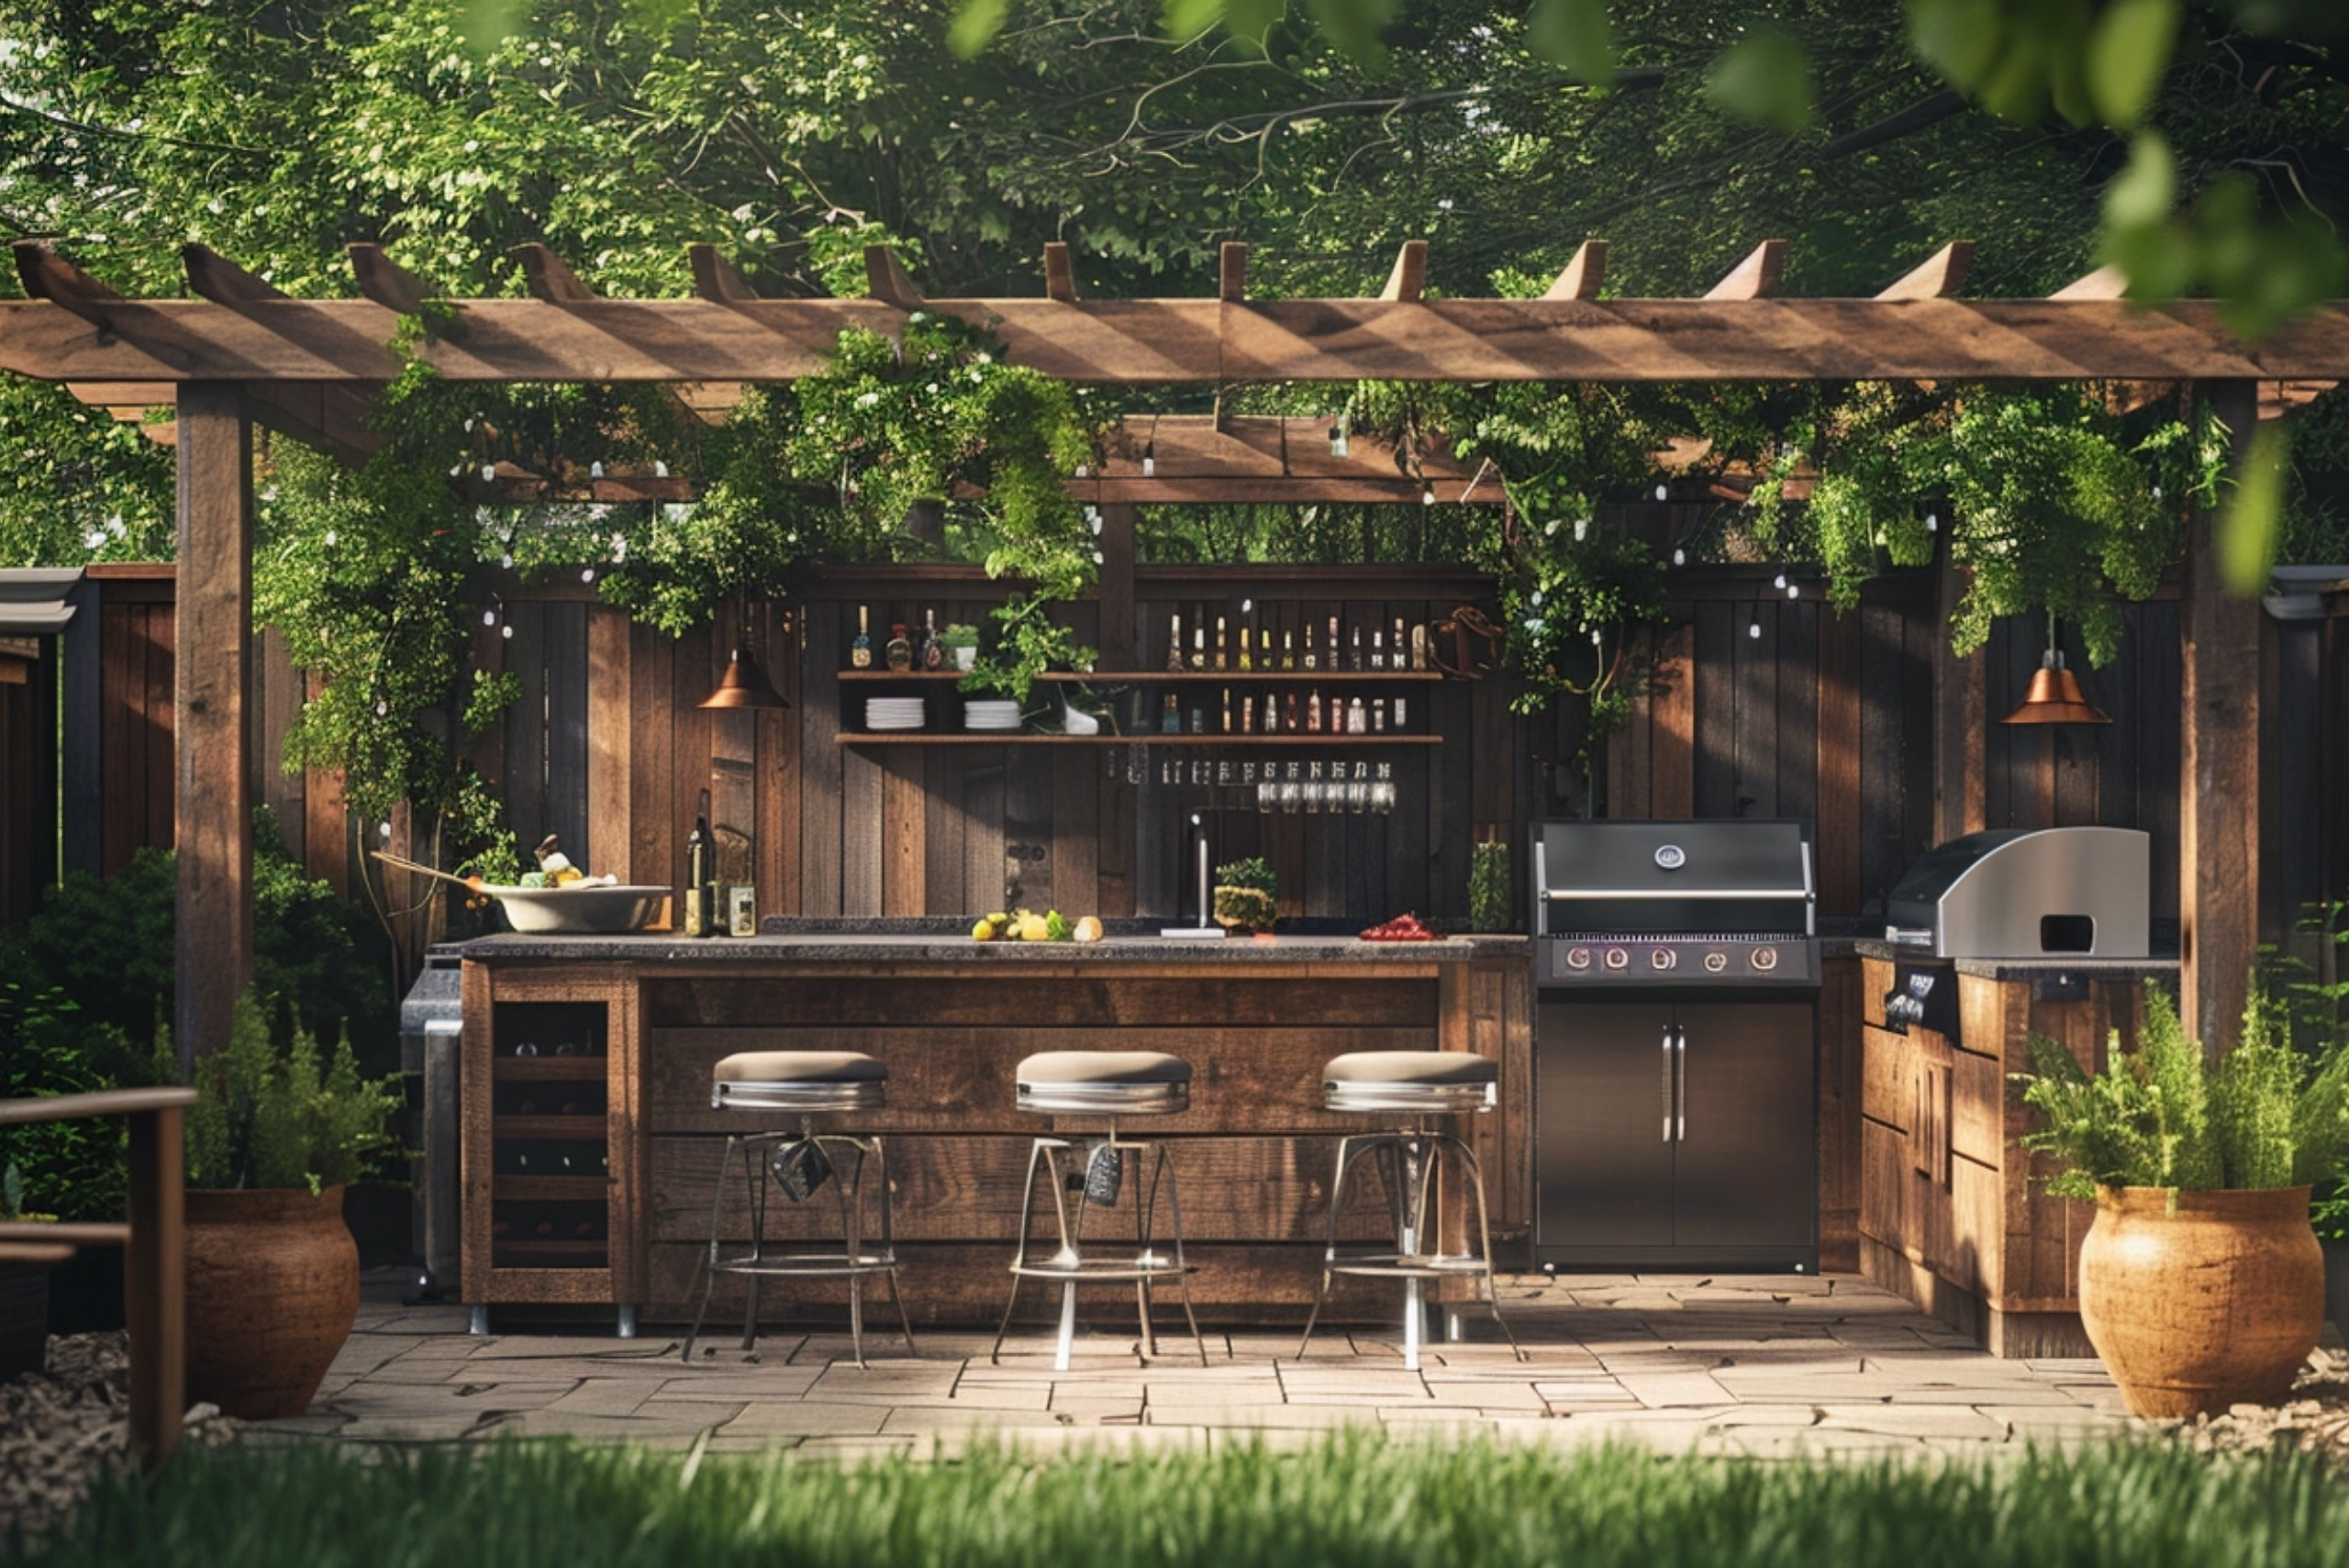 A DIY outdoor bar with green plants and modern stools.